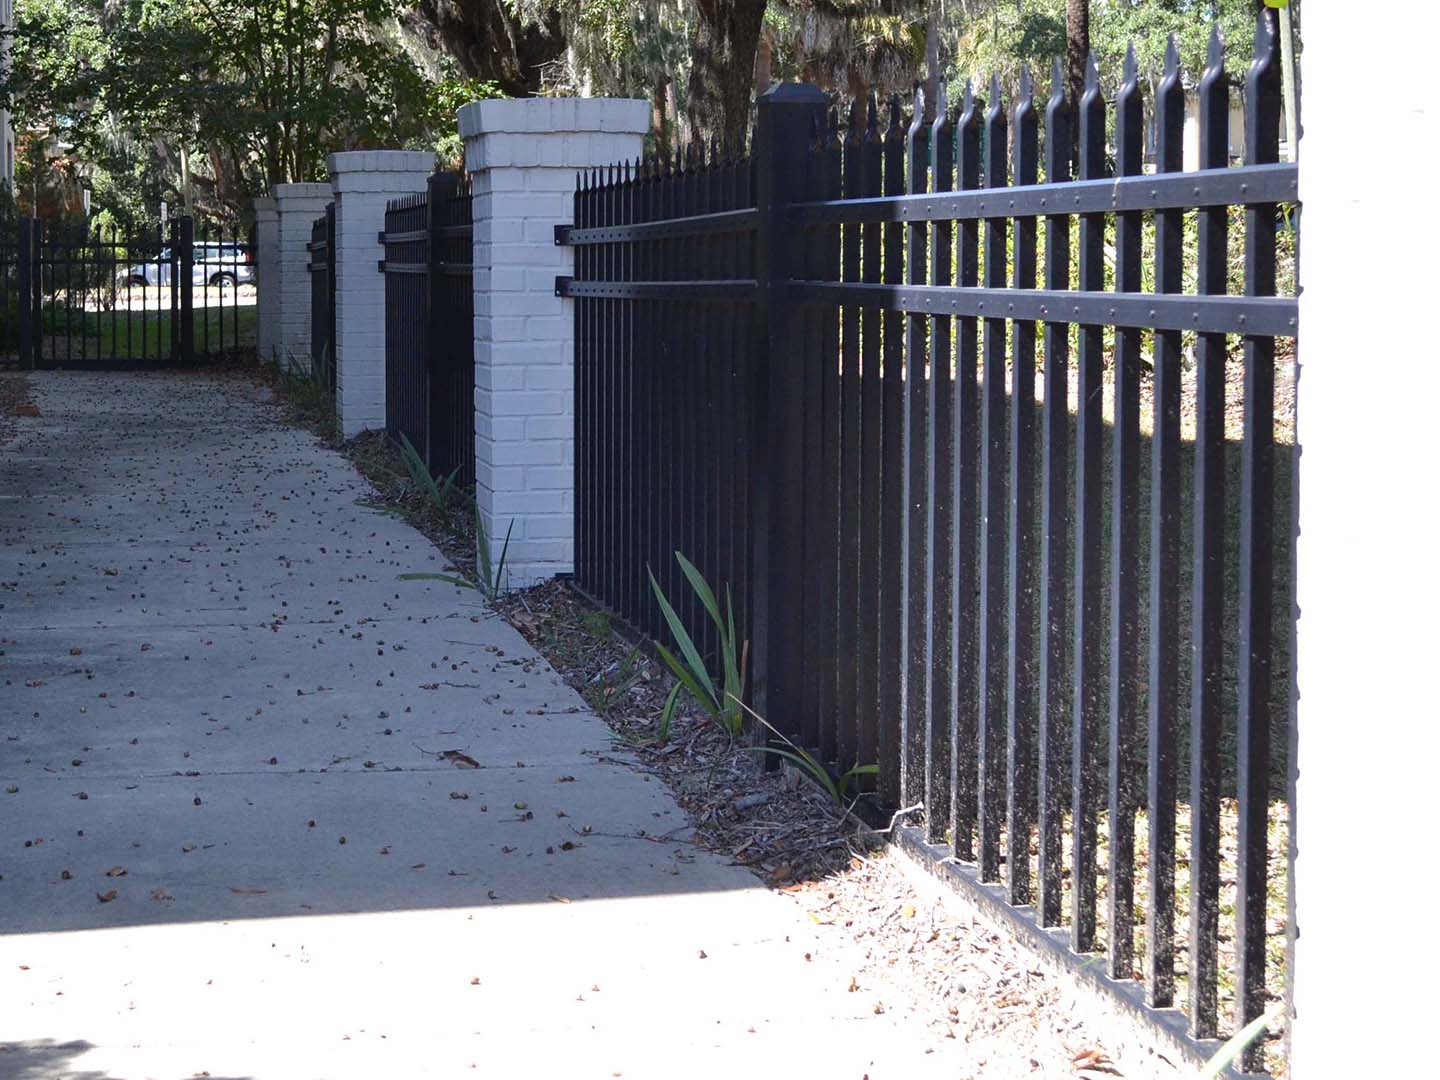 Commercial Black Aluminum Fence with Stone Columns - Fence Company in Georgia